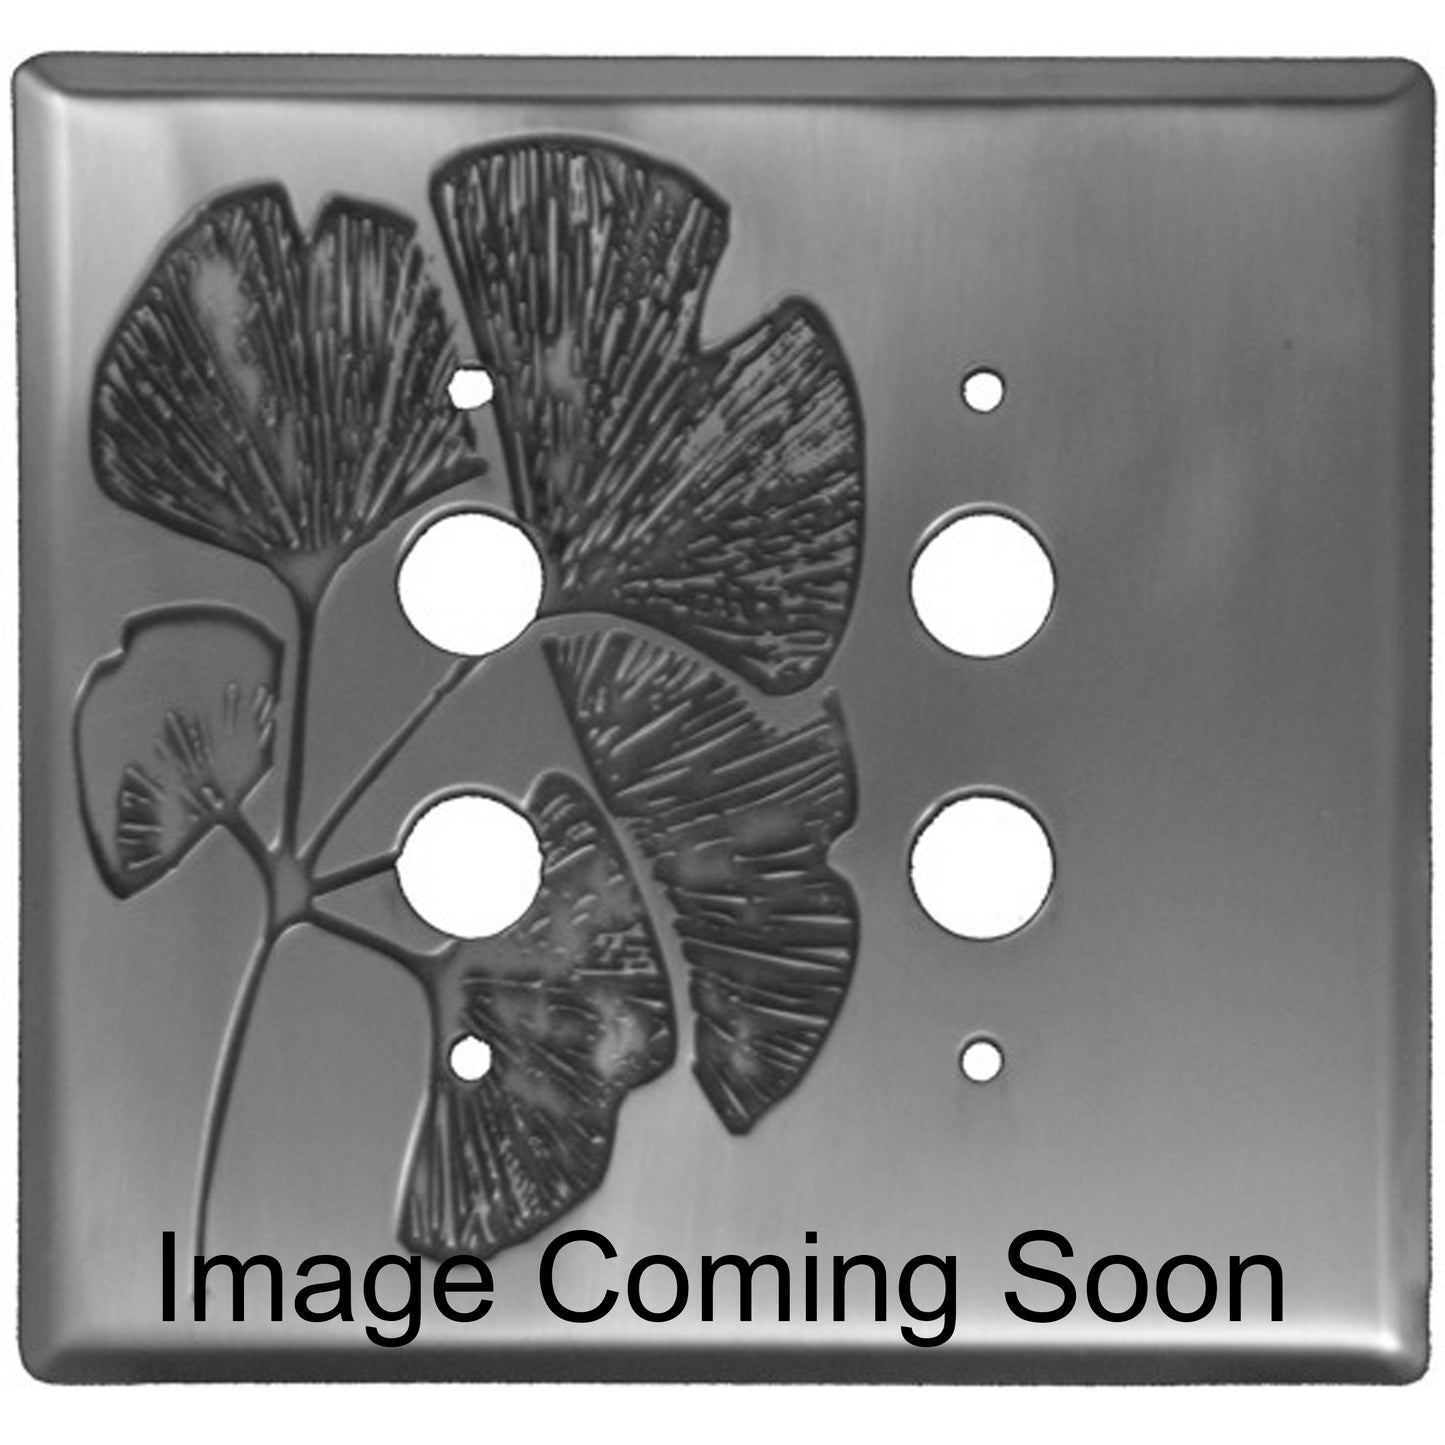 Ginkgo Stainless Steel 2 PushbuttonSwitchplate